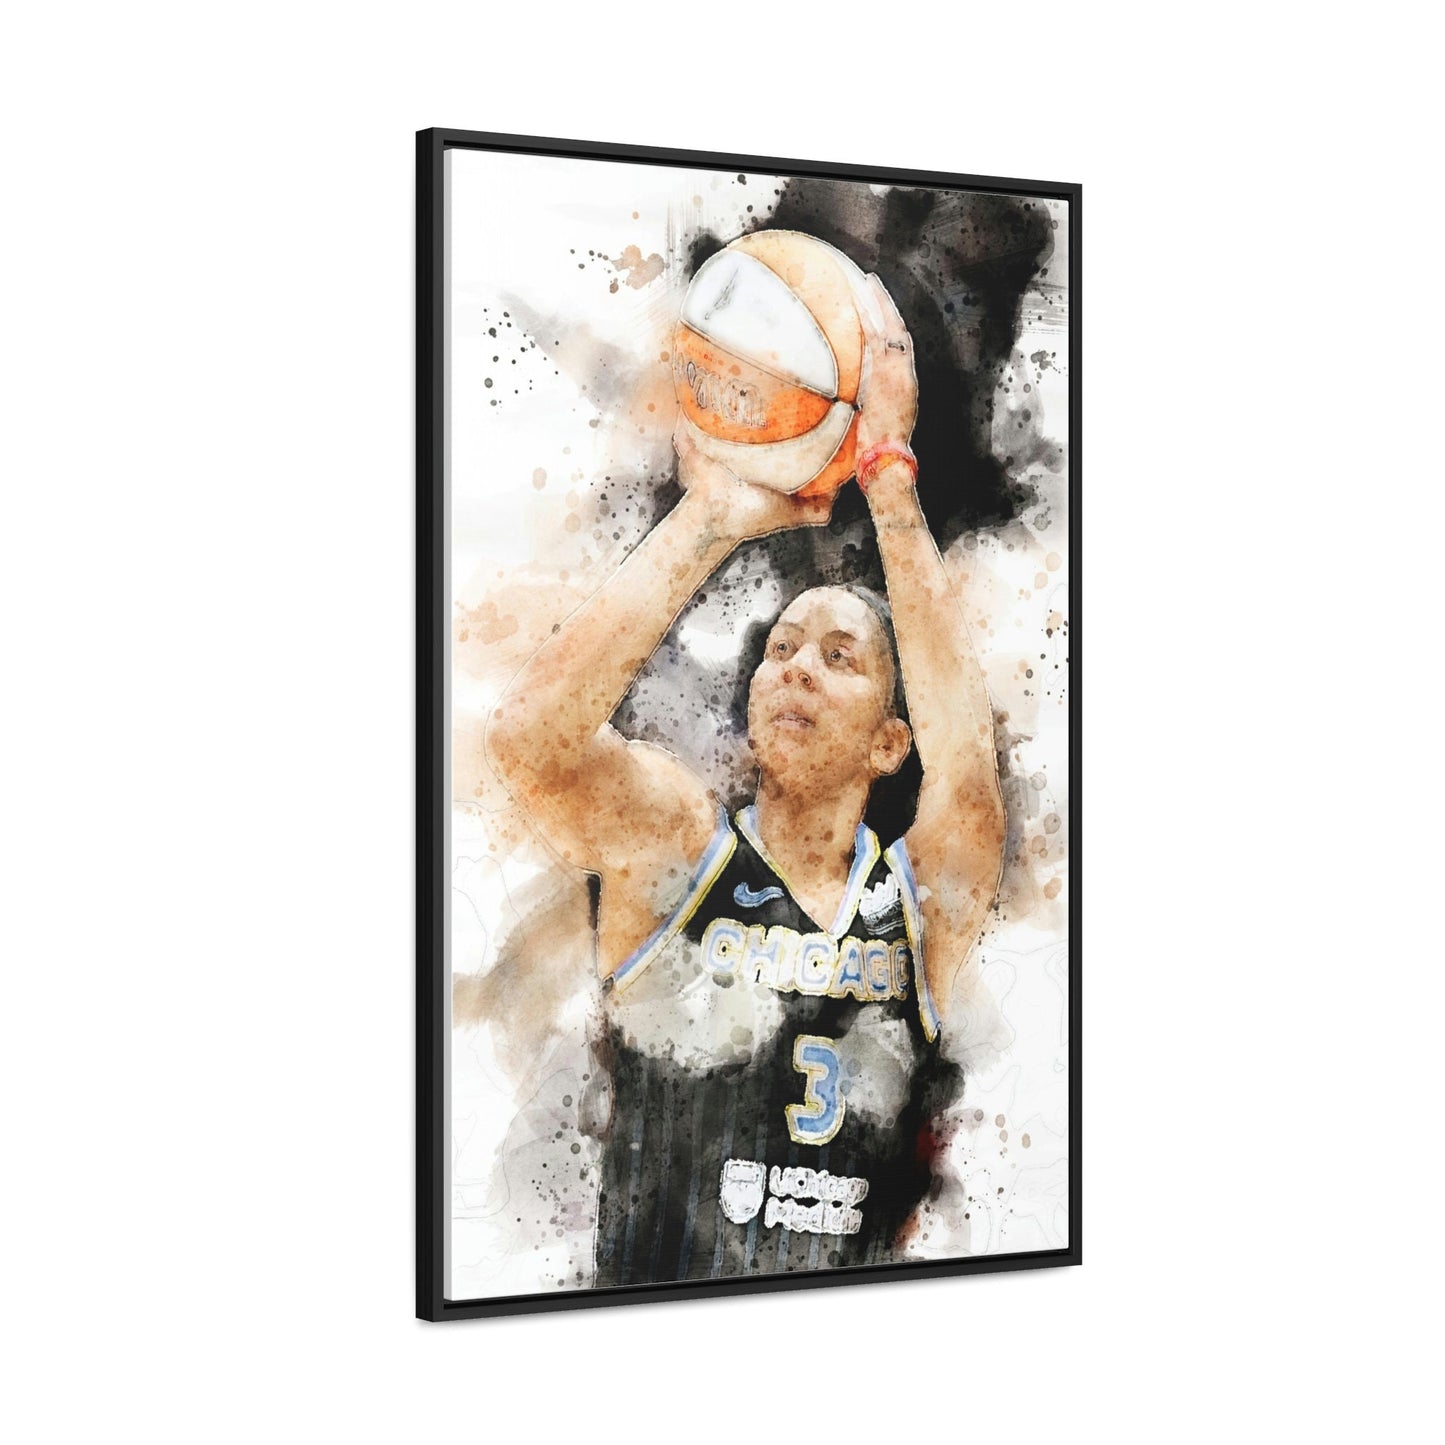 Candace Parker Art, women's basketball poster, Canvas Wrap, Kids Room, Man Cave, Woman Cave, Game Room